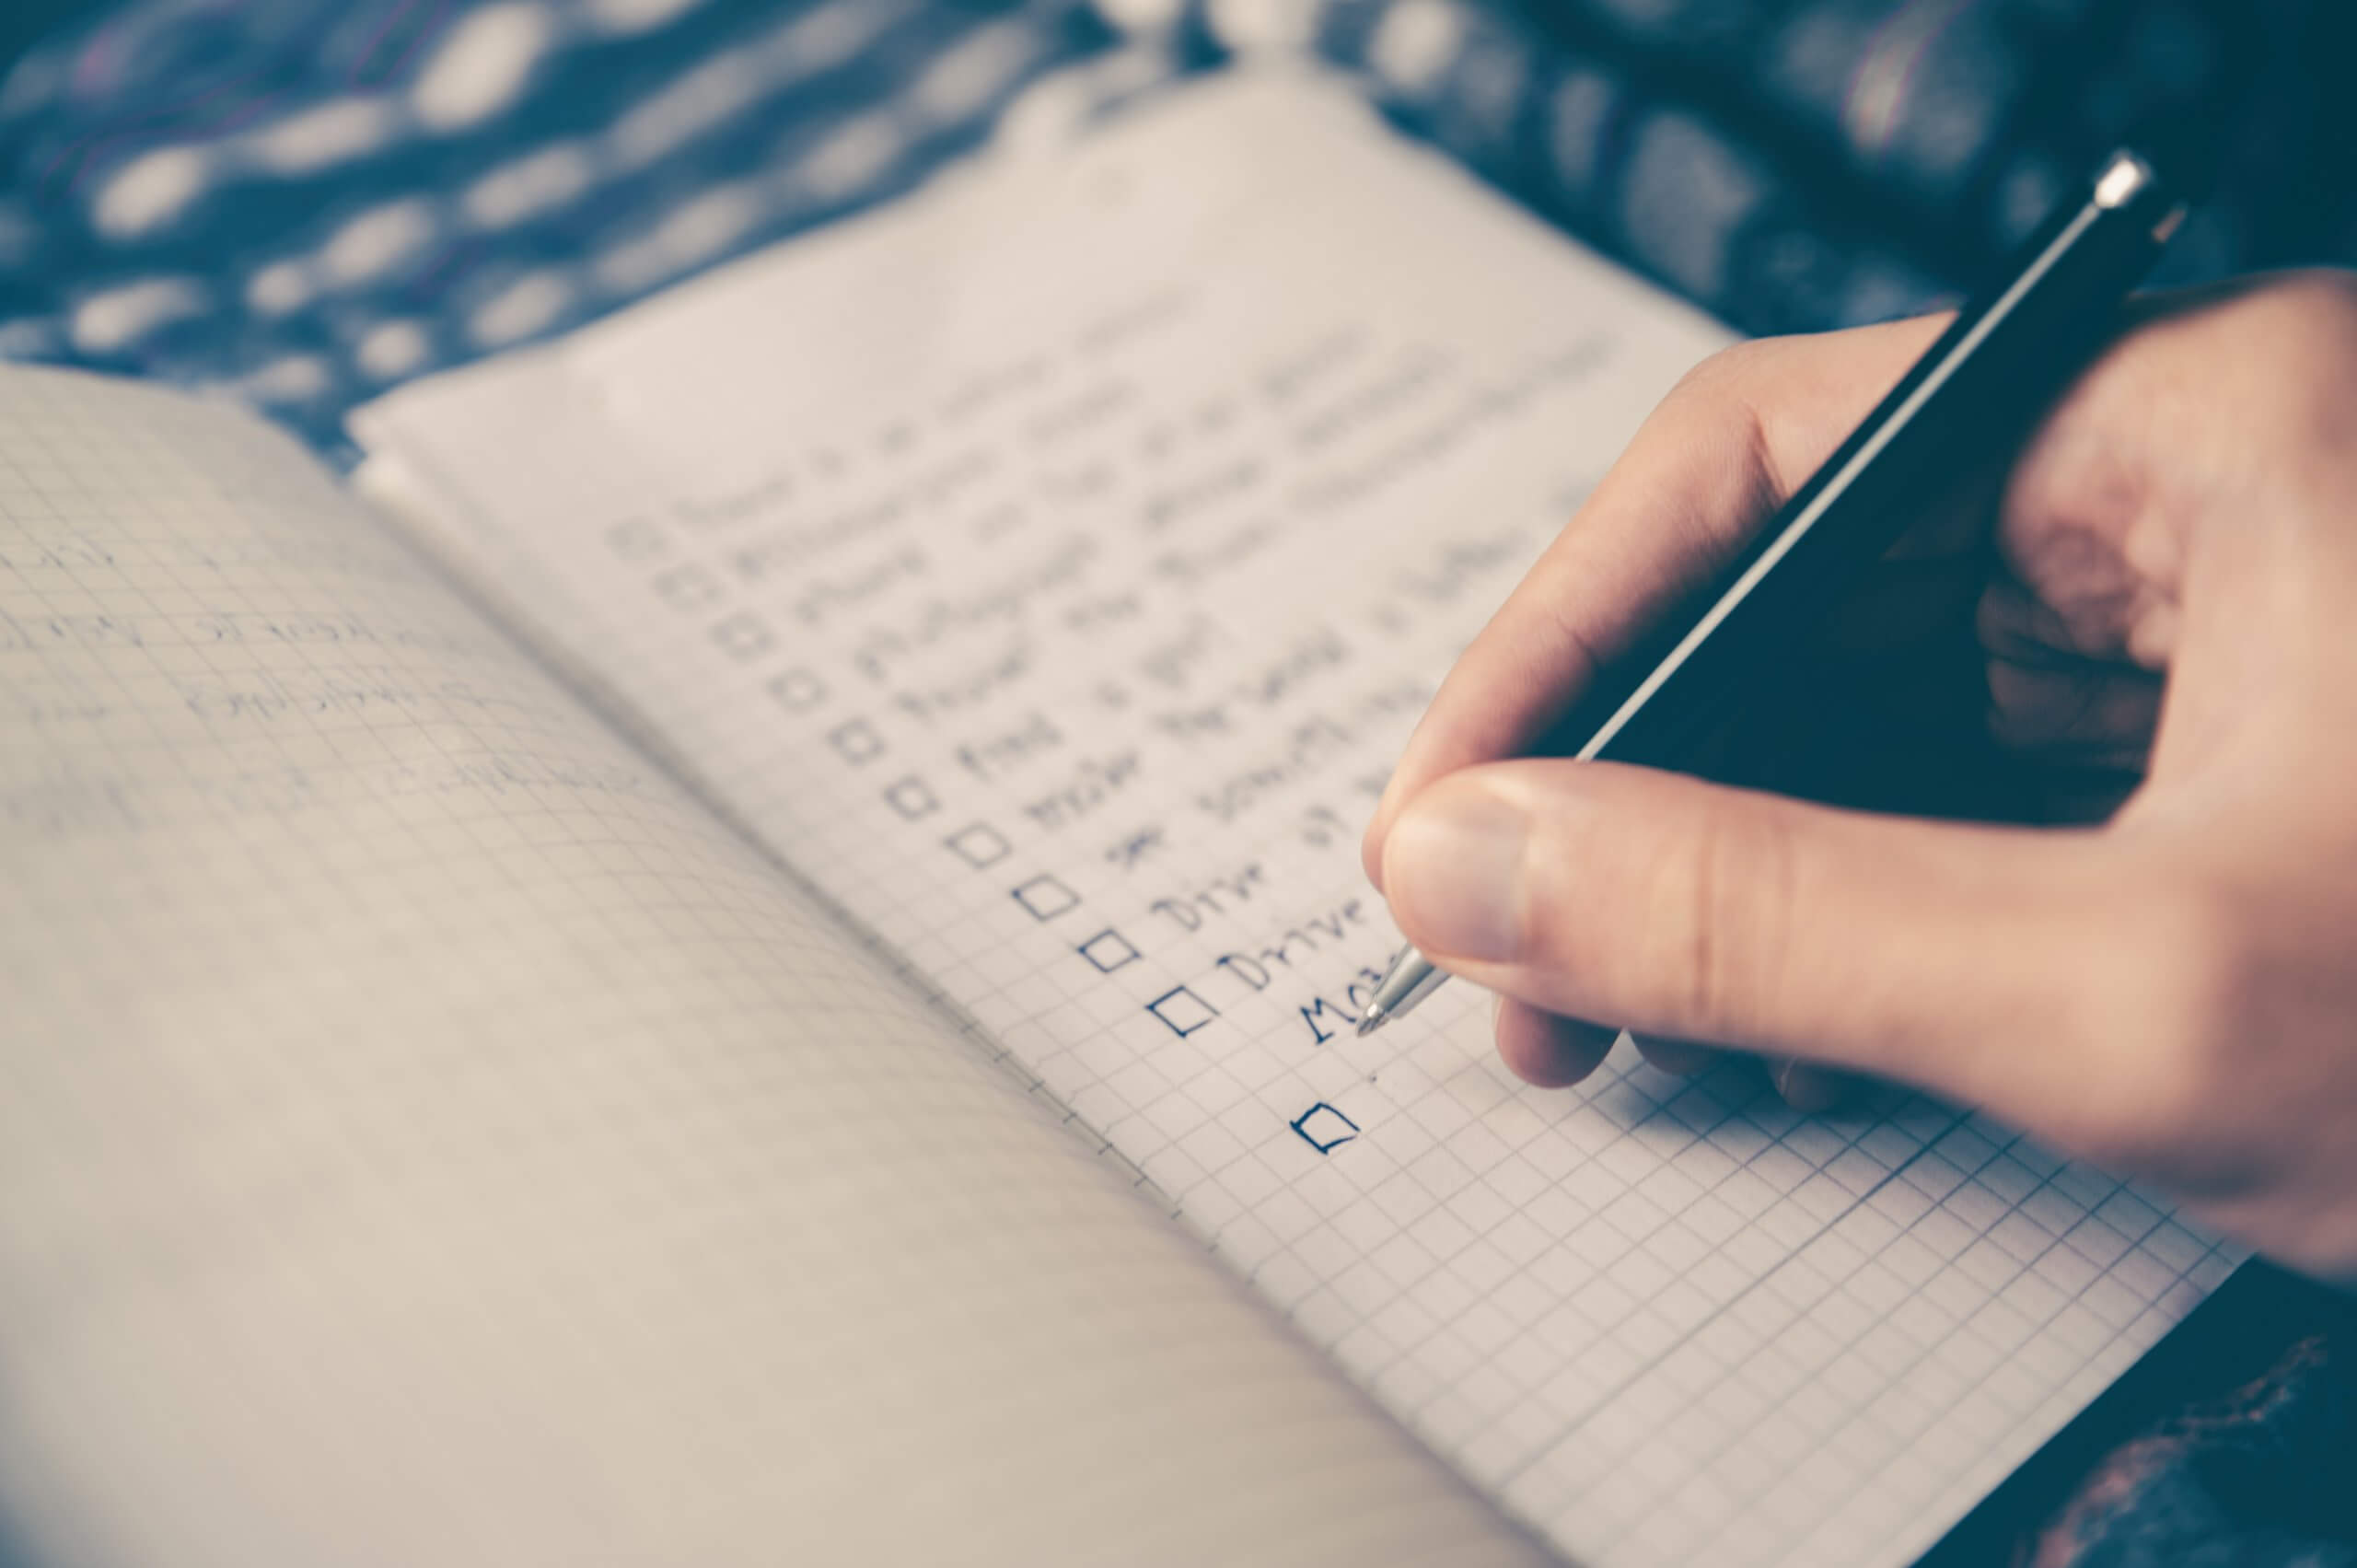 Checklist in a notebook, hand with pen checking off items